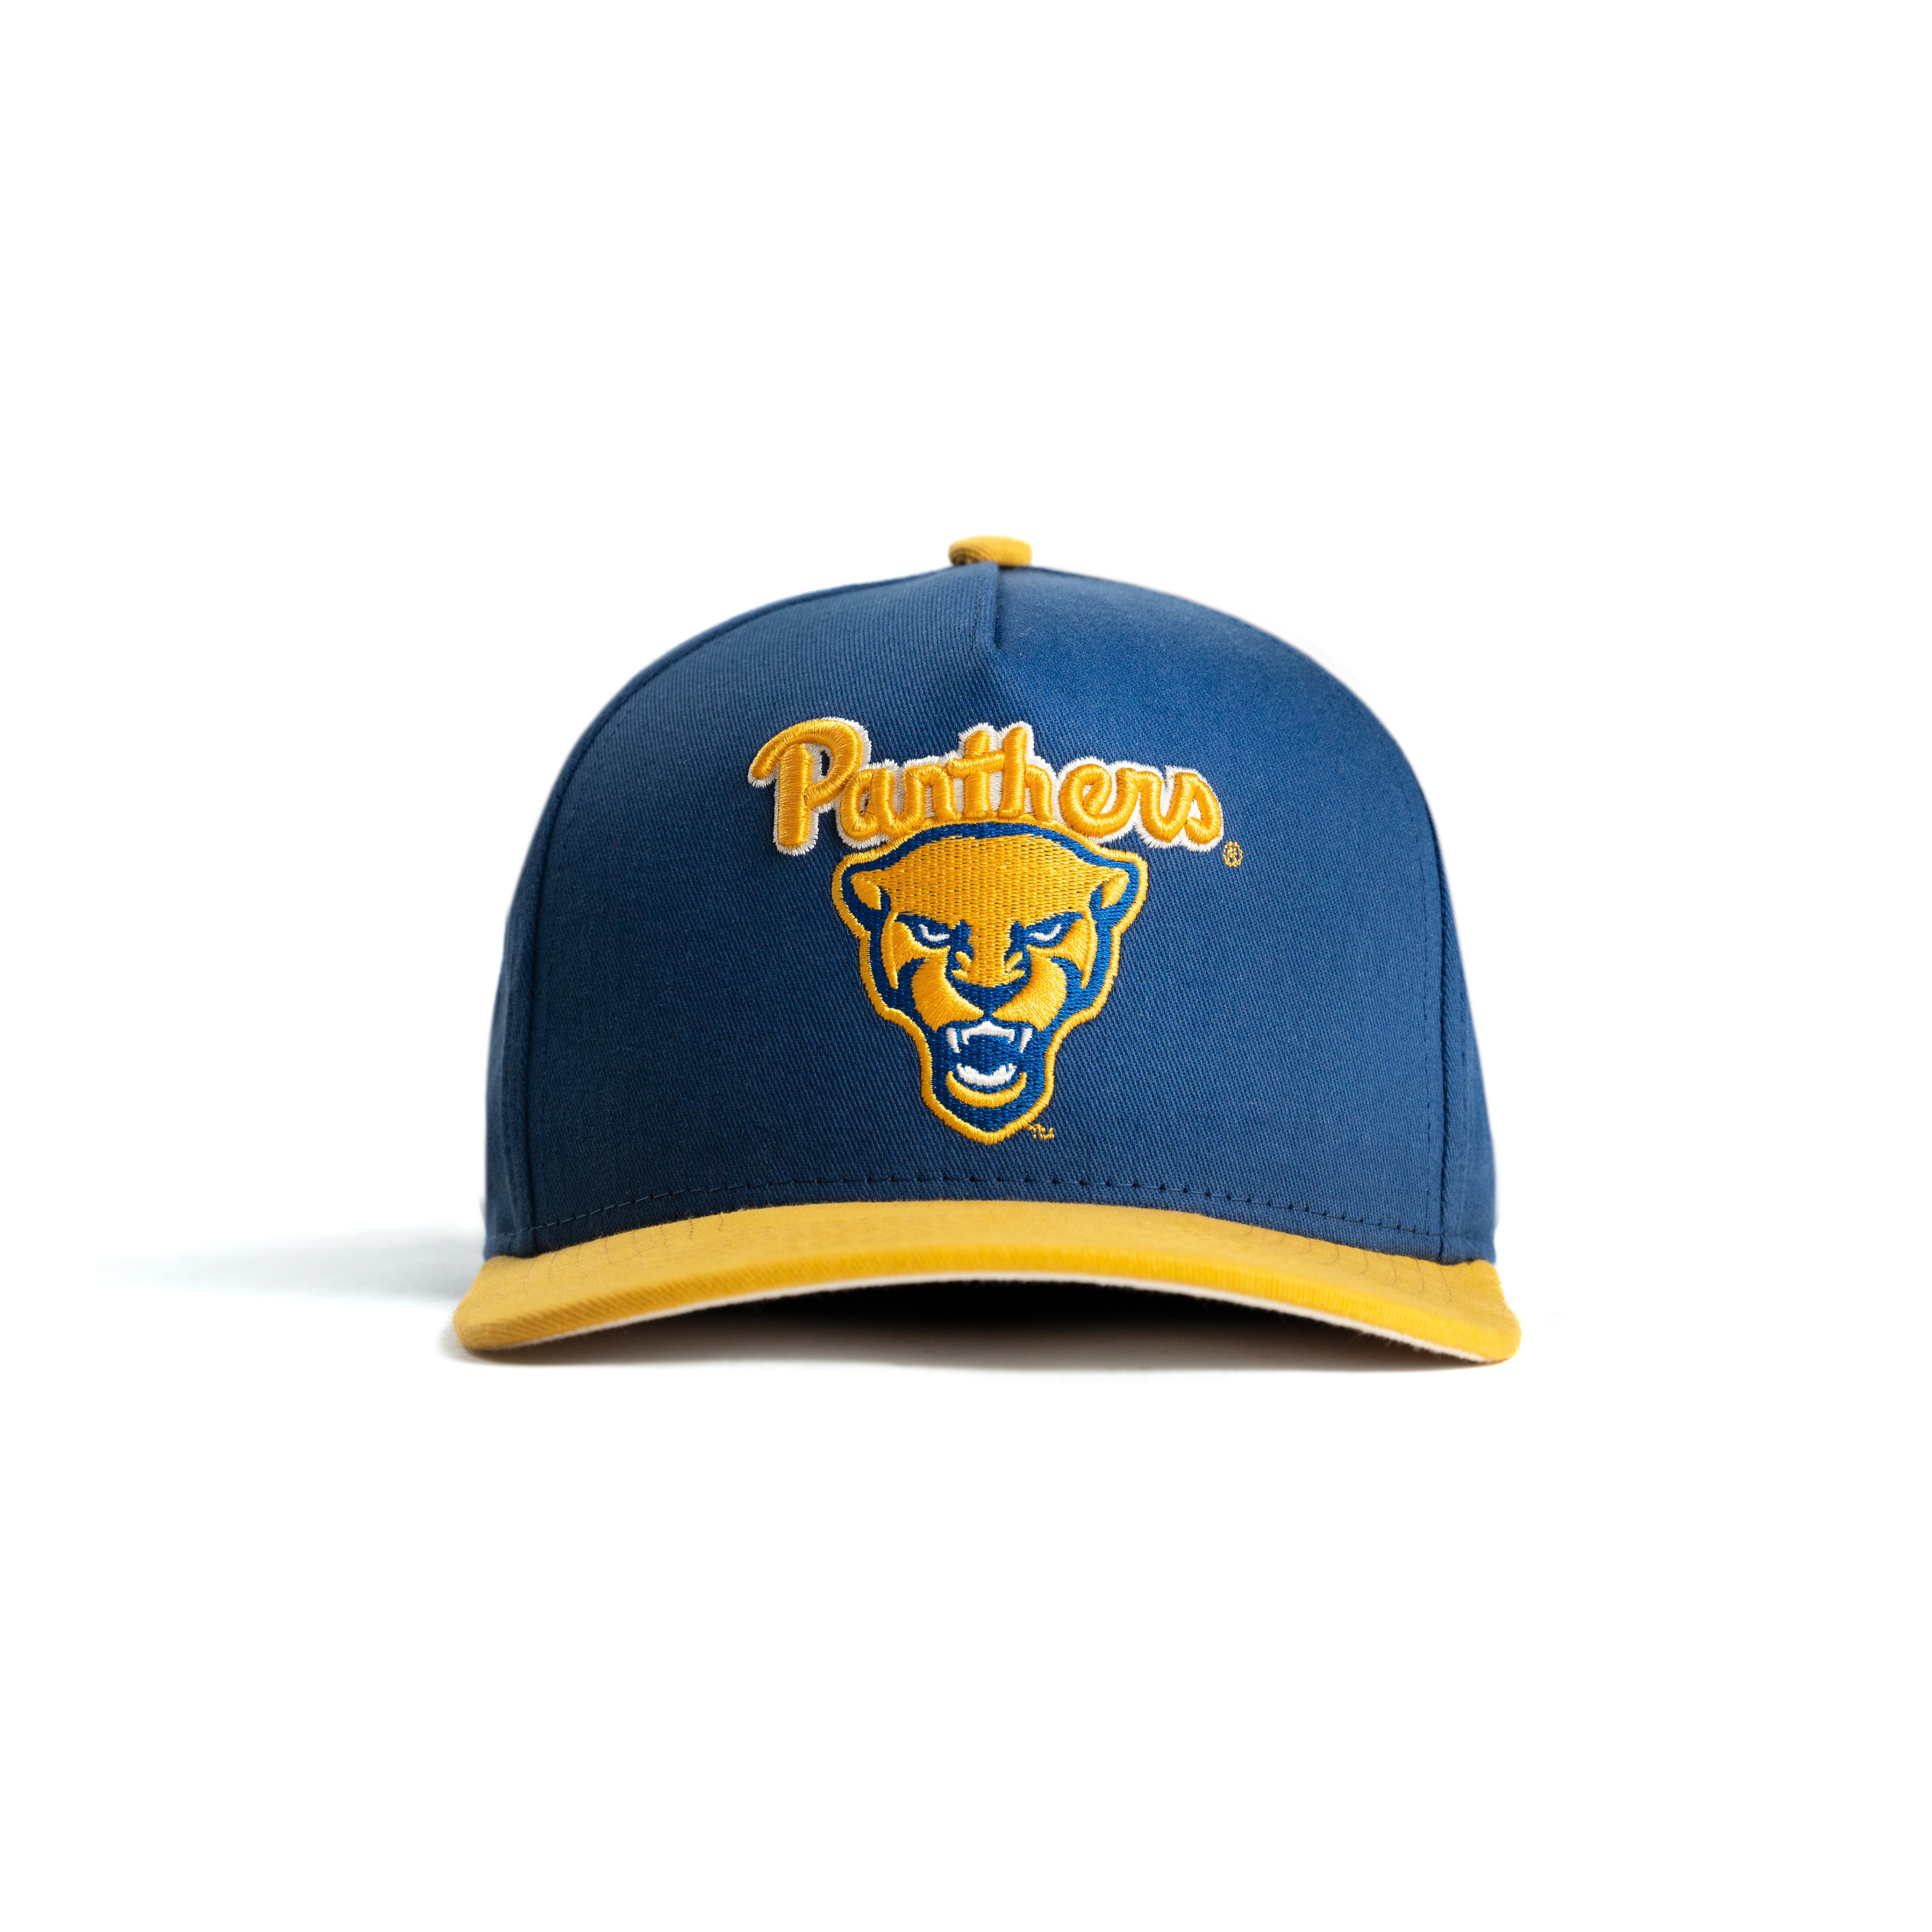 Pittsburgh Panthers 3 Item Mystery Box